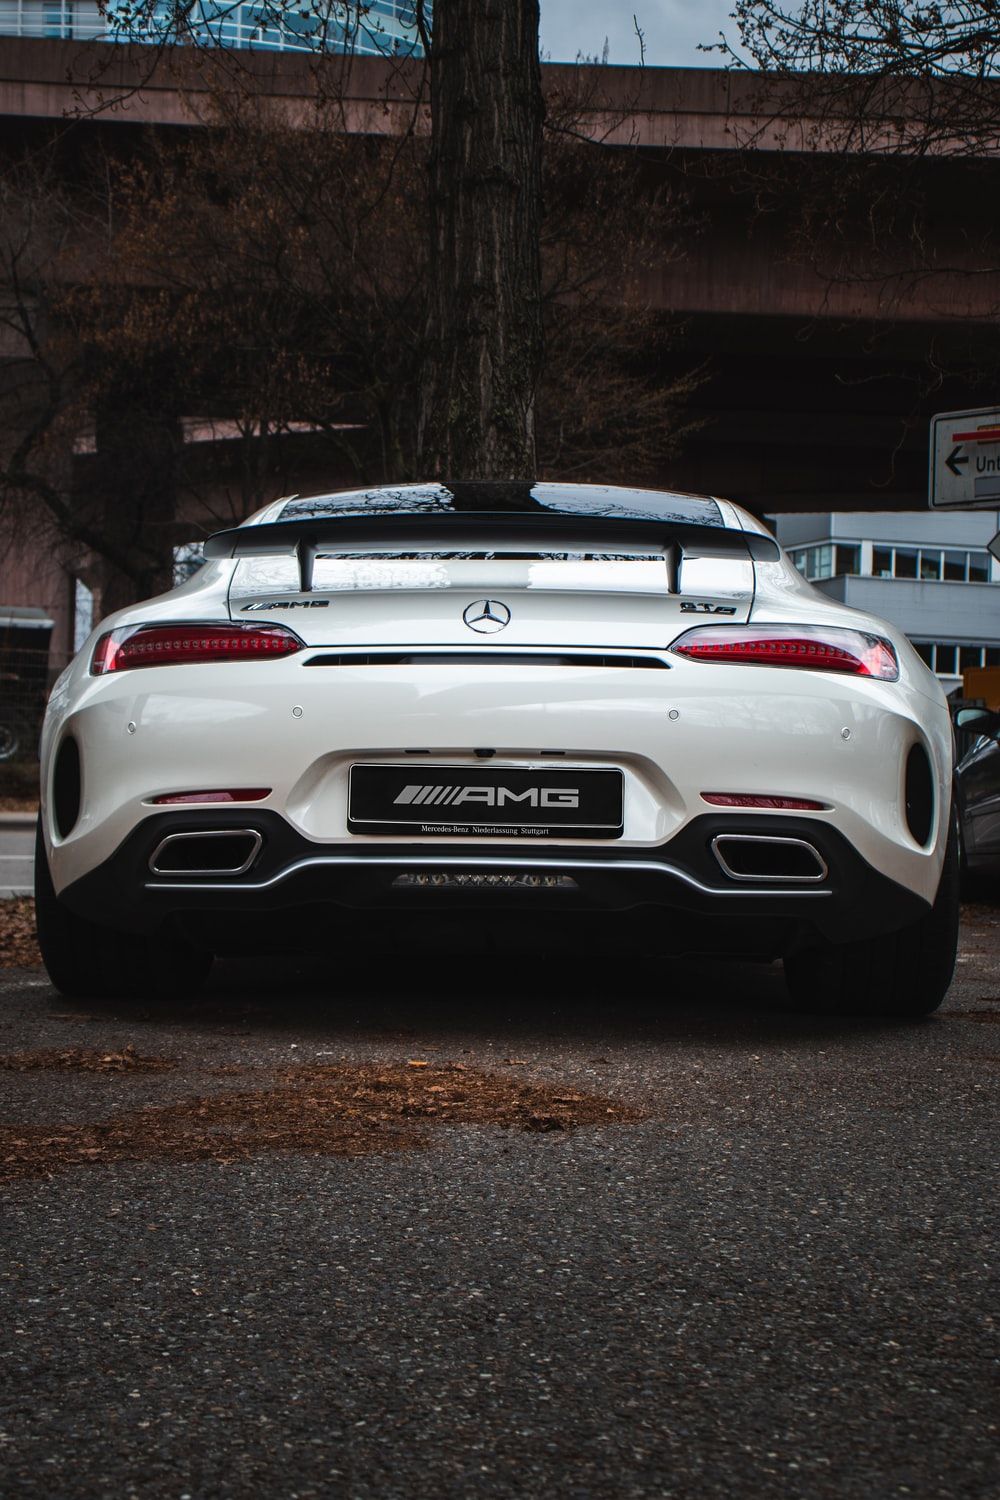 Amg Gt Picture [HD]. Download Free Image